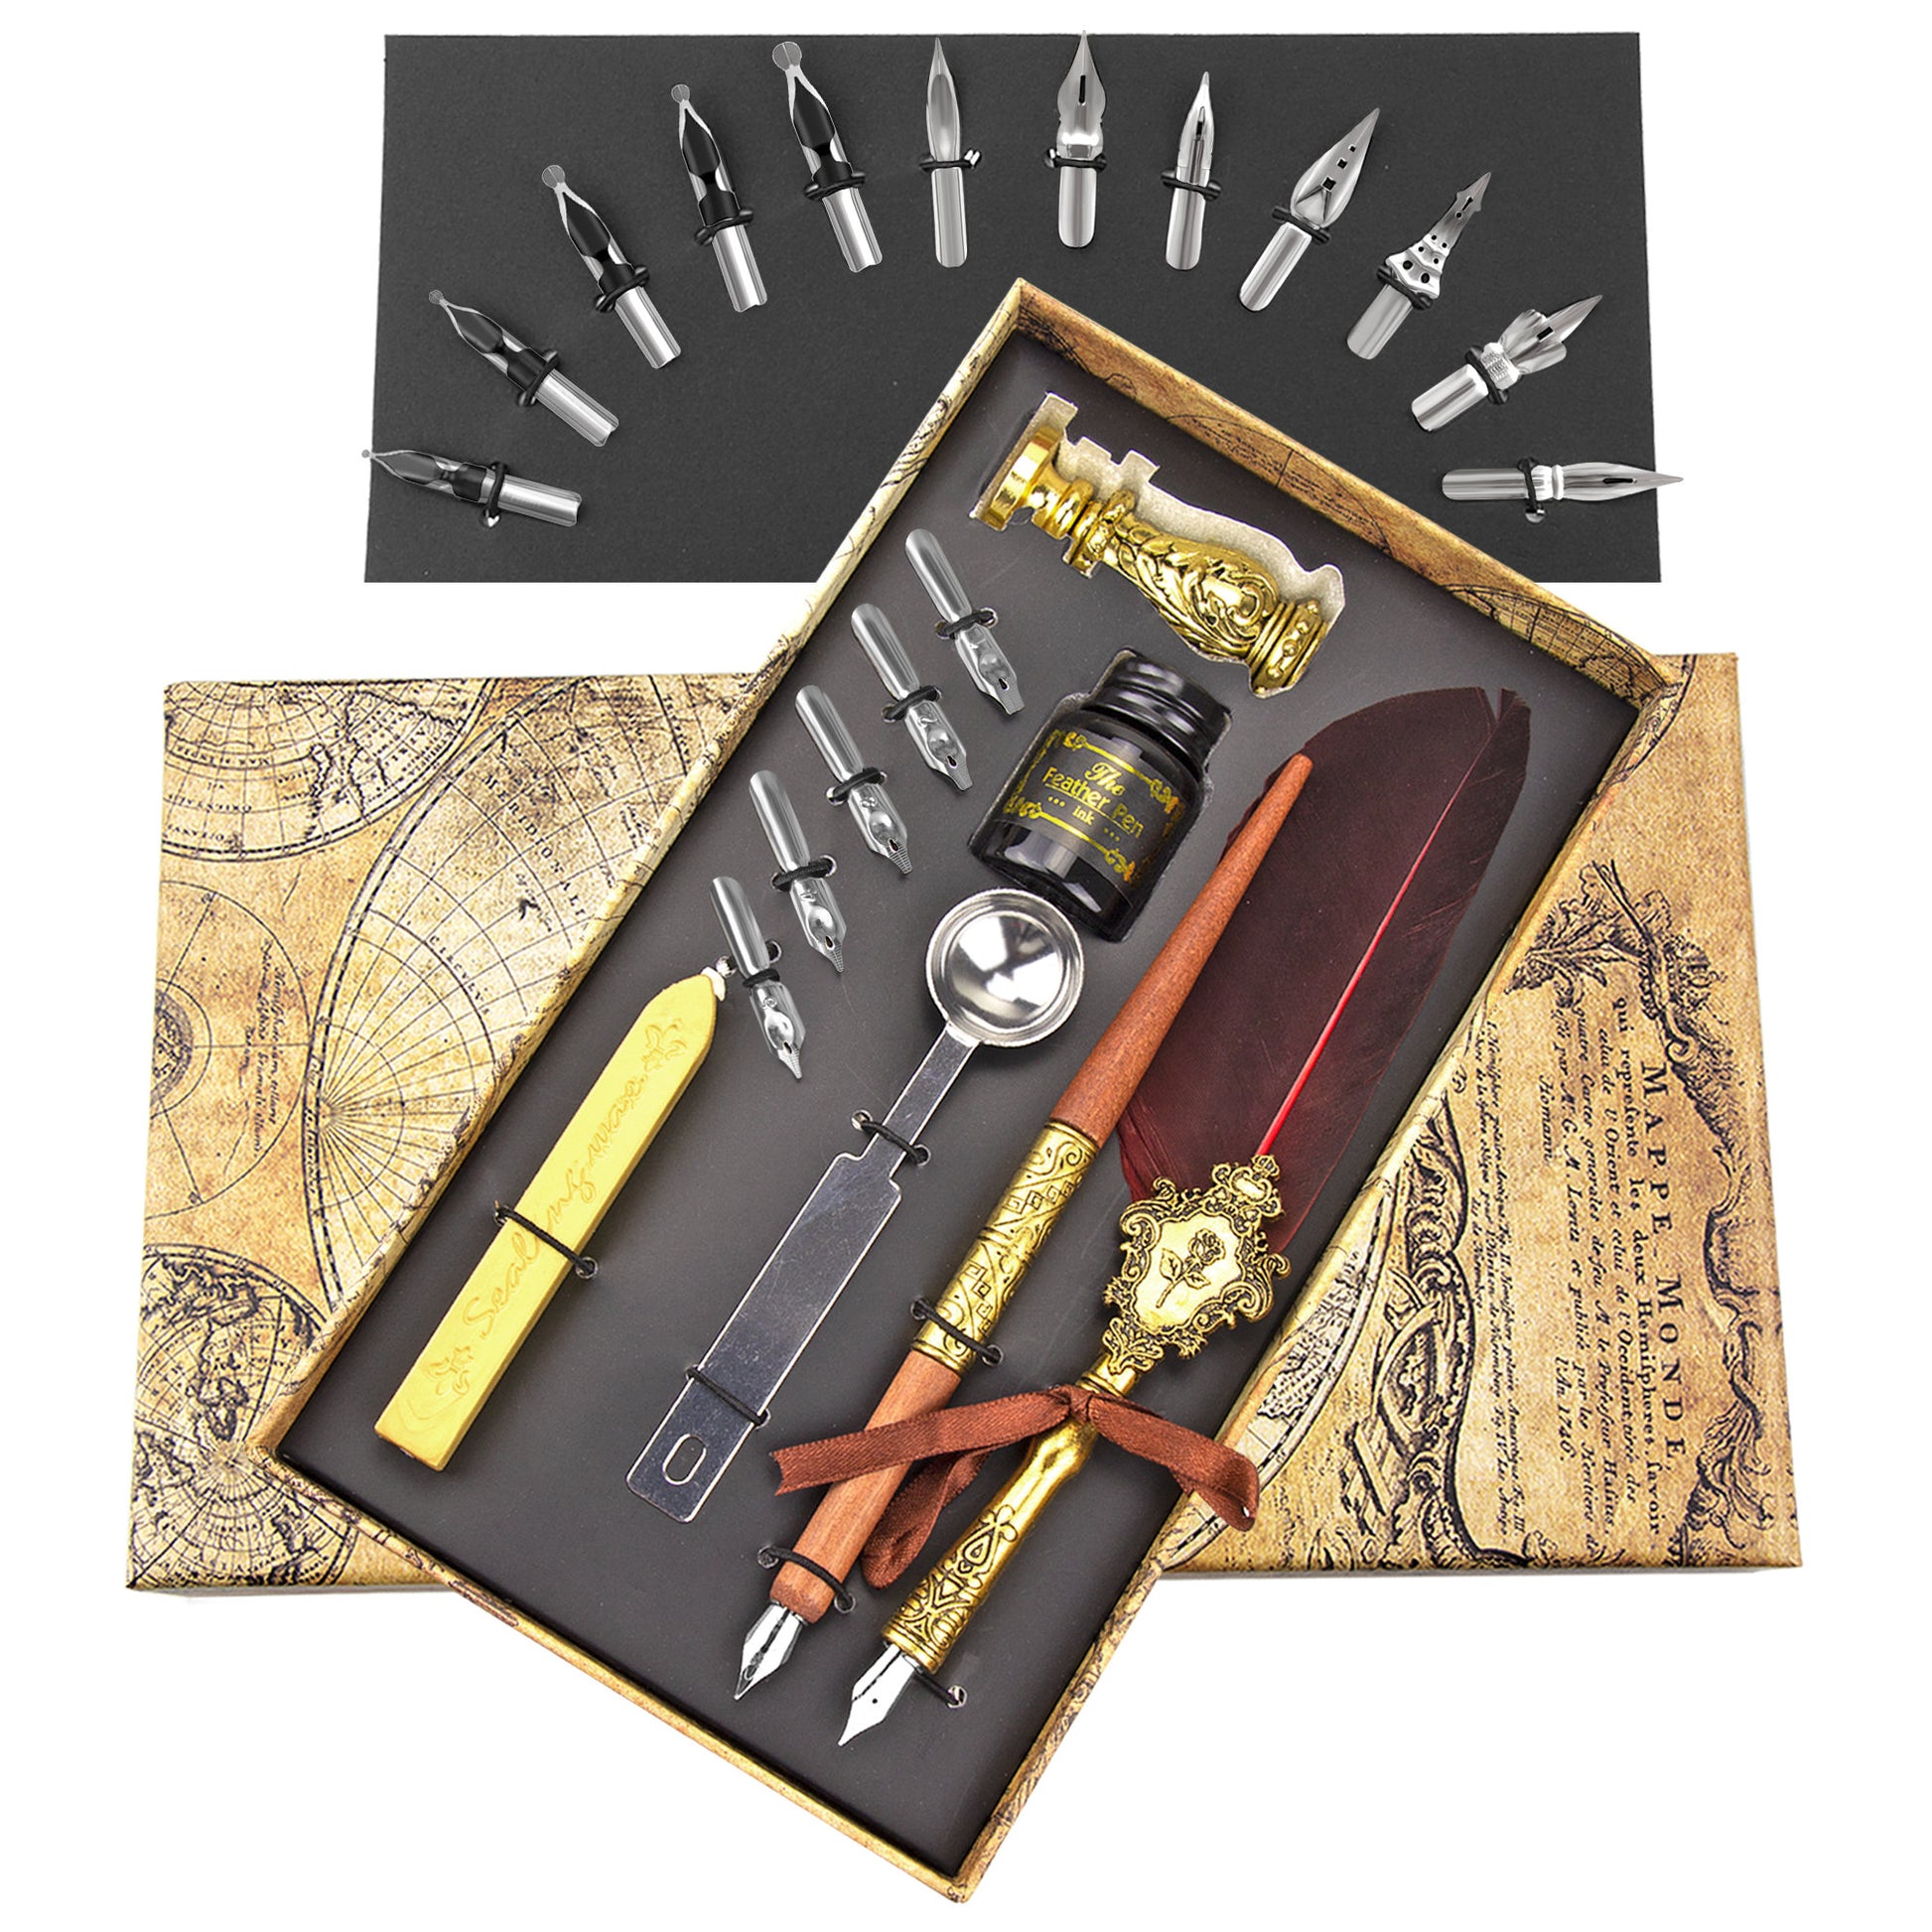 Quill Pen Writing Set Desk Box with Wax Seal Stamp, Sealing Wax, Inkwell with Holder, Blotter, Nibs and Burgundy Feather Quill